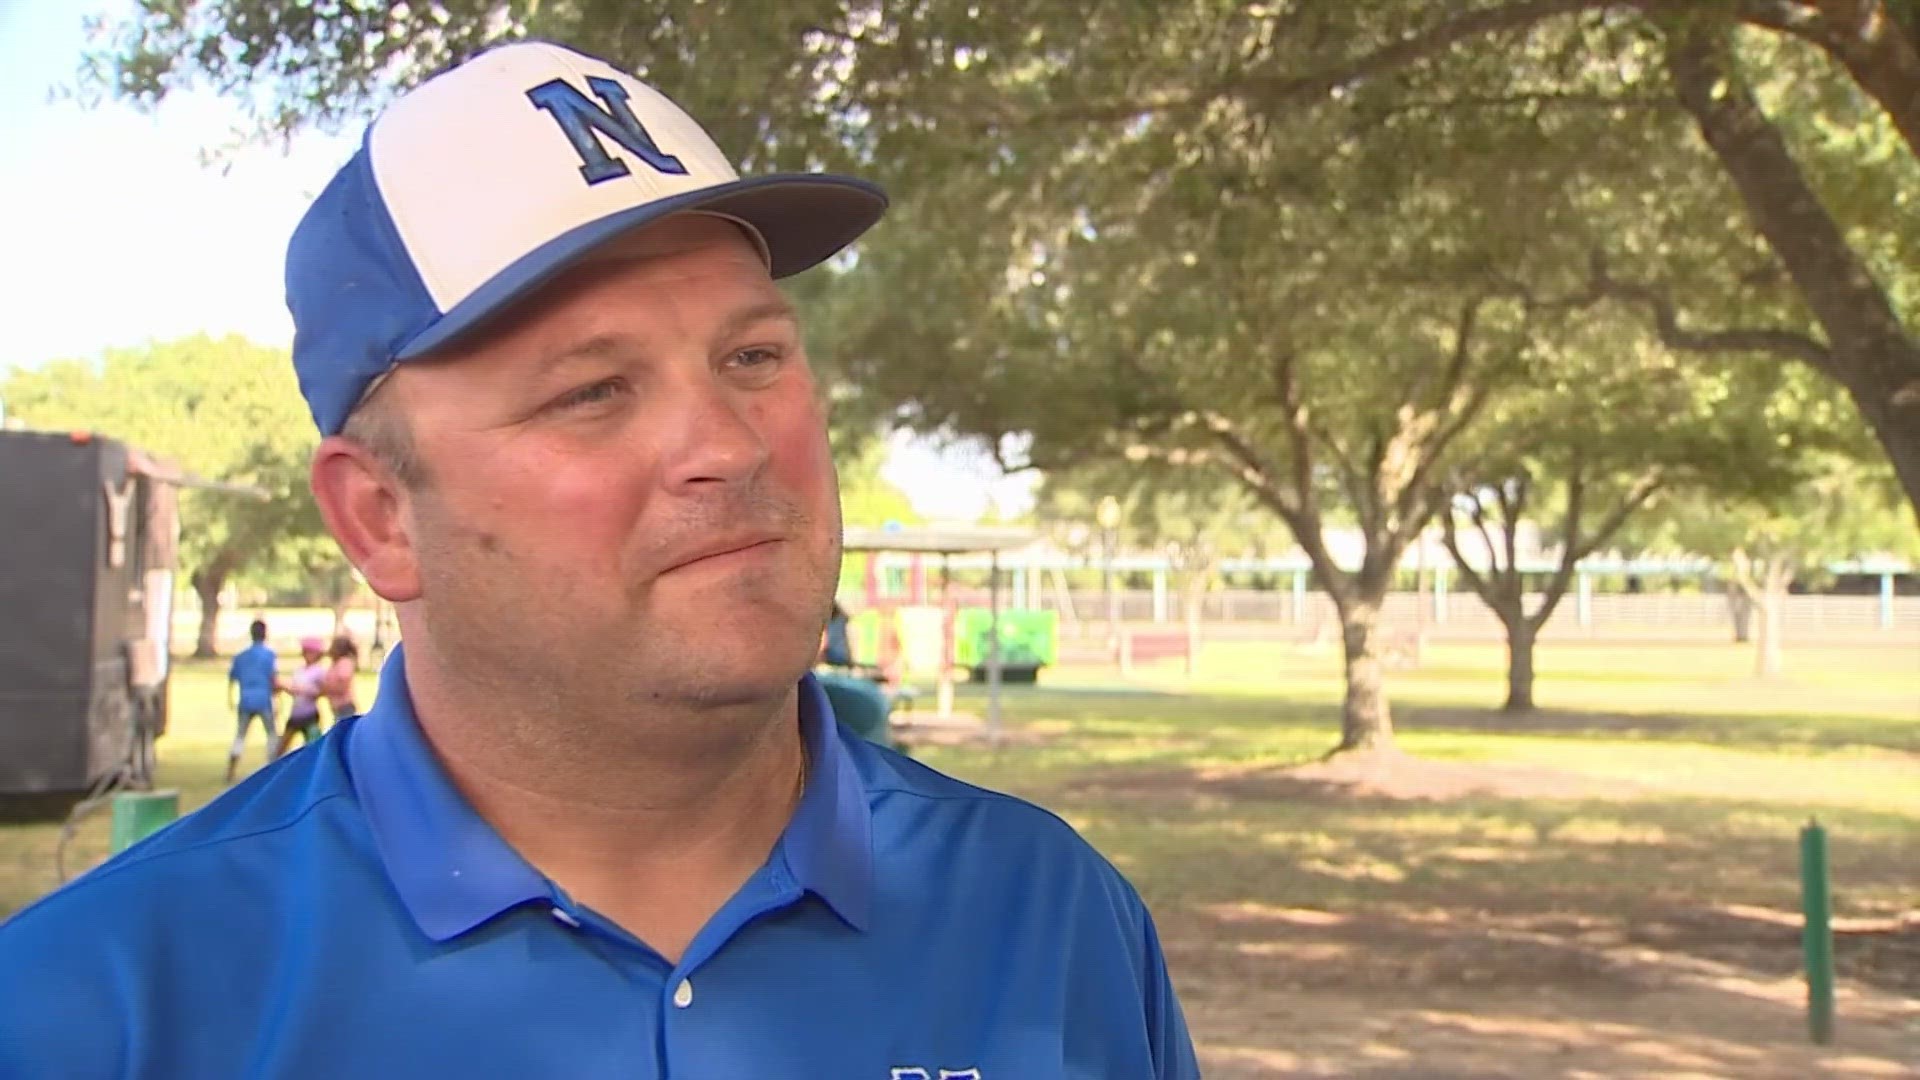 Needville looks to make moves in debut appearance at Little League